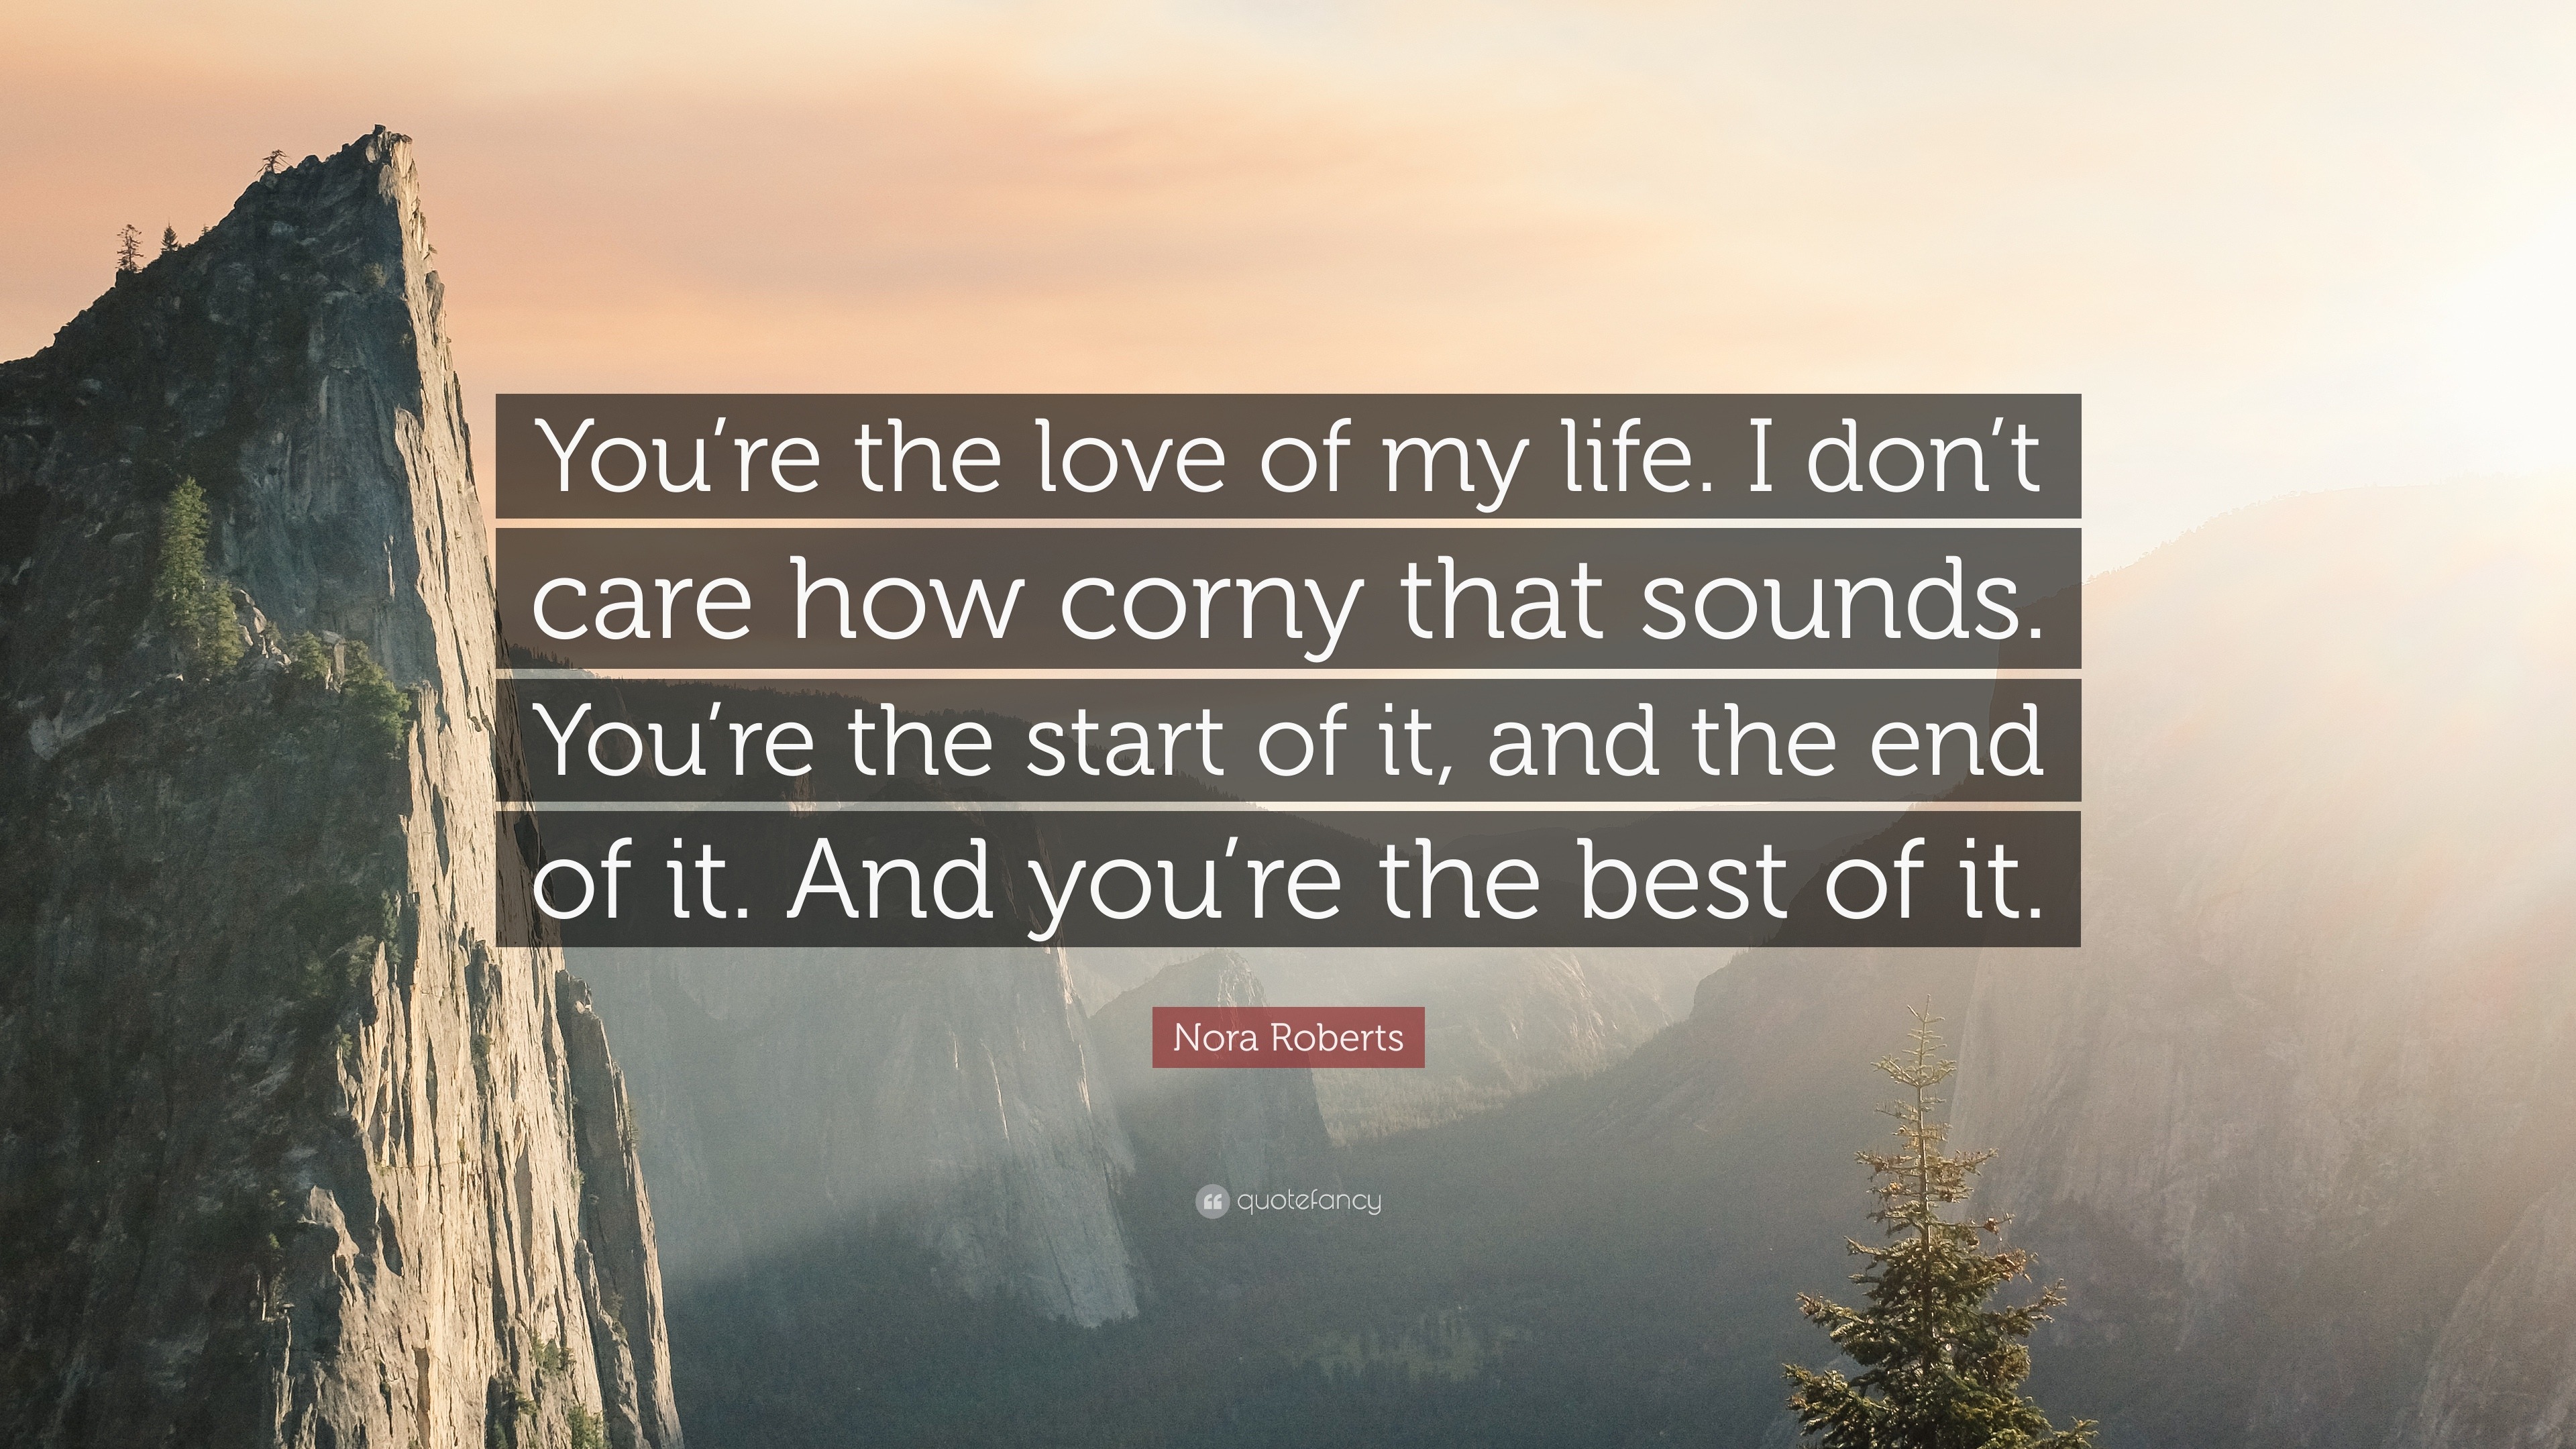 Nora Roberts Quote “You re the love of my life I don